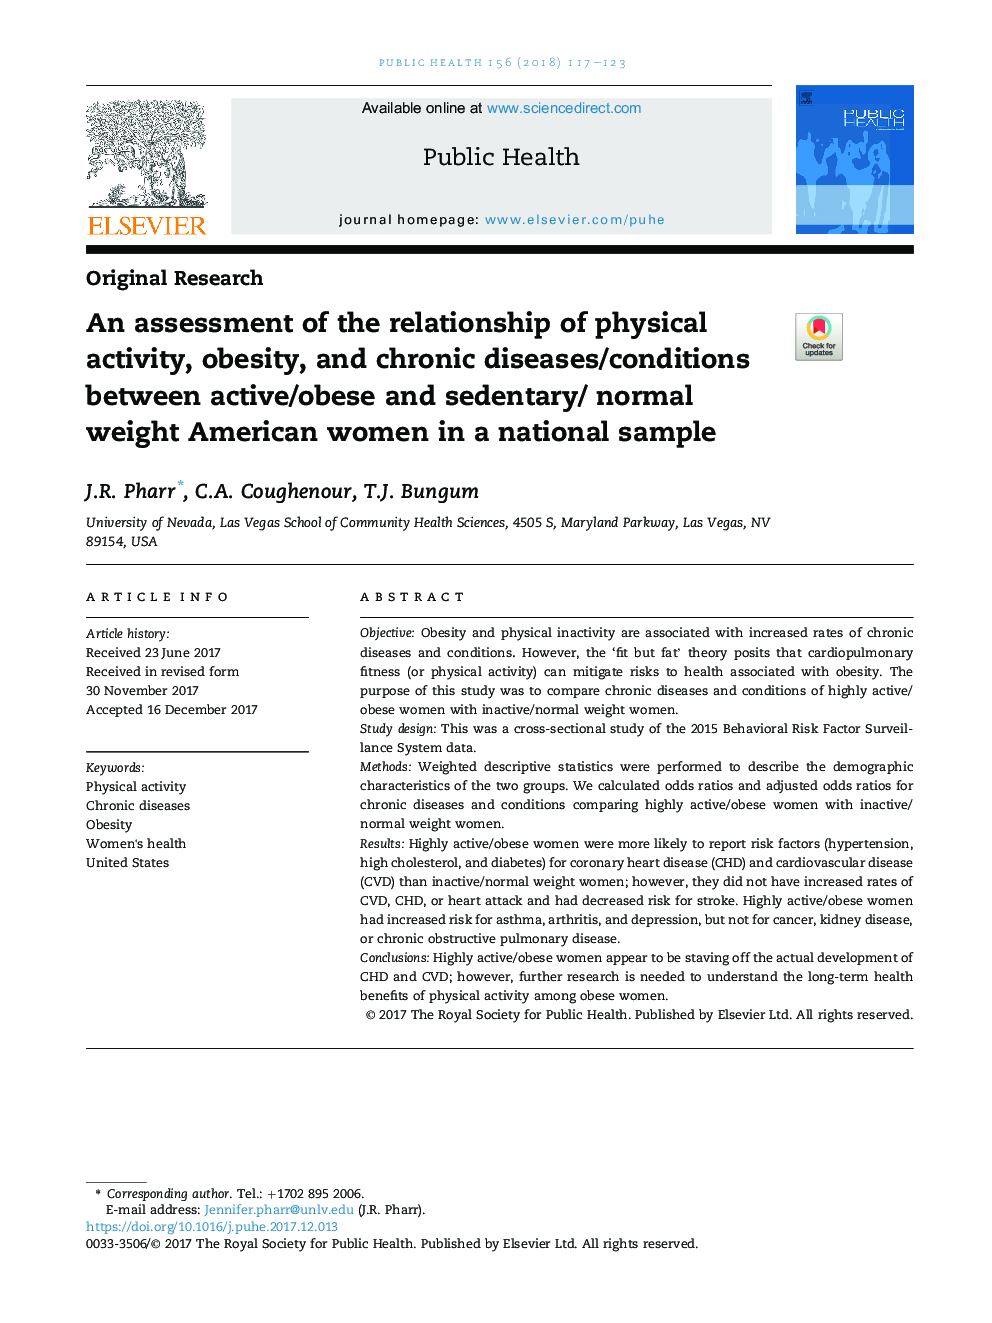 An assessment of the relationship of physical activity, obesity, and chronic diseases/conditions between active/obese and sedentary/ normal weight American women in a national sample